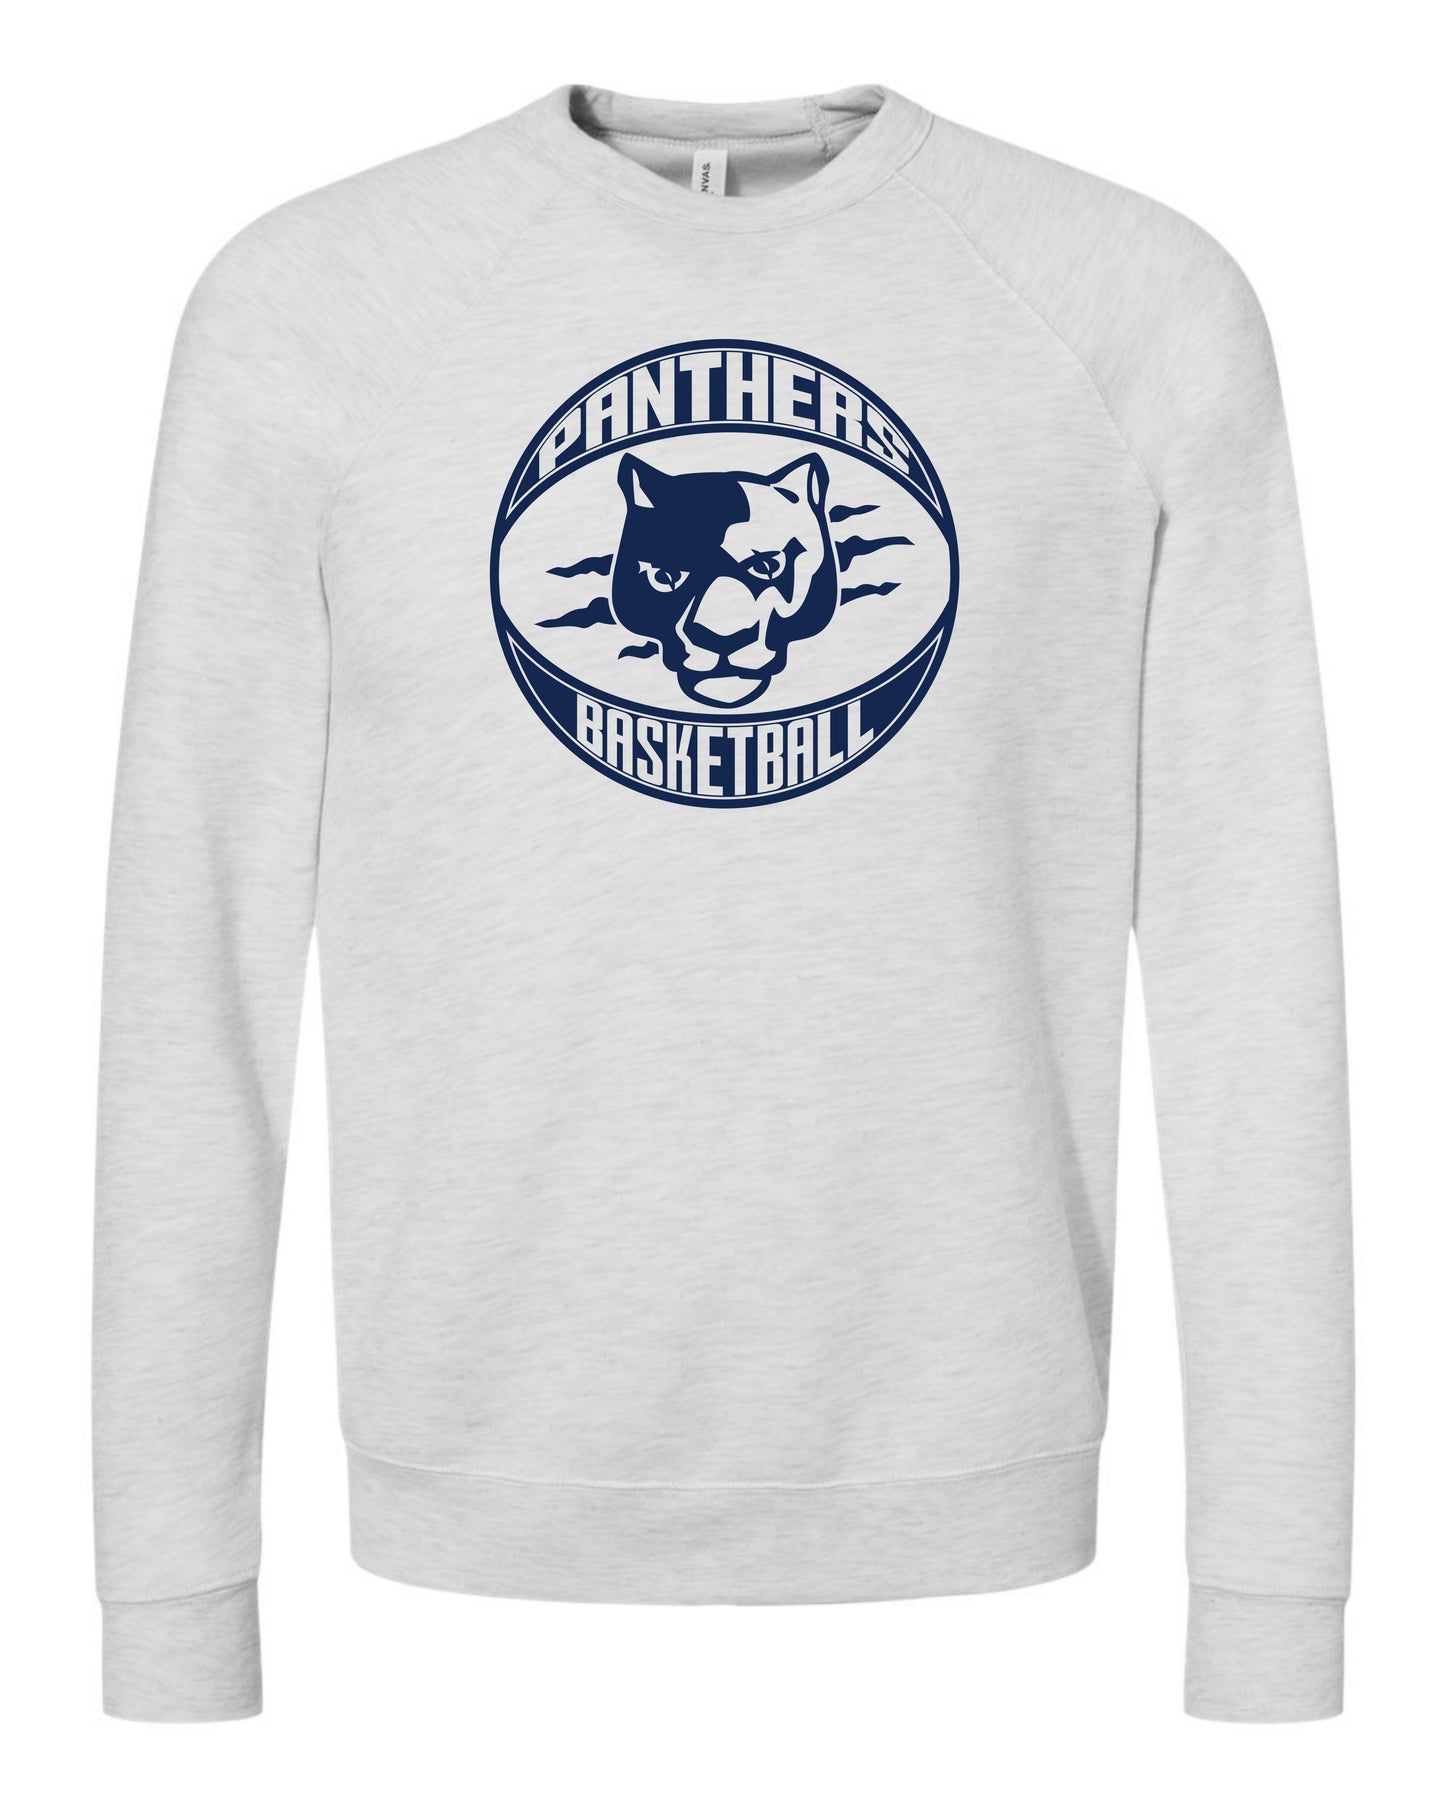 Panthers BBall Claw Ball - Adult Sweatshirt